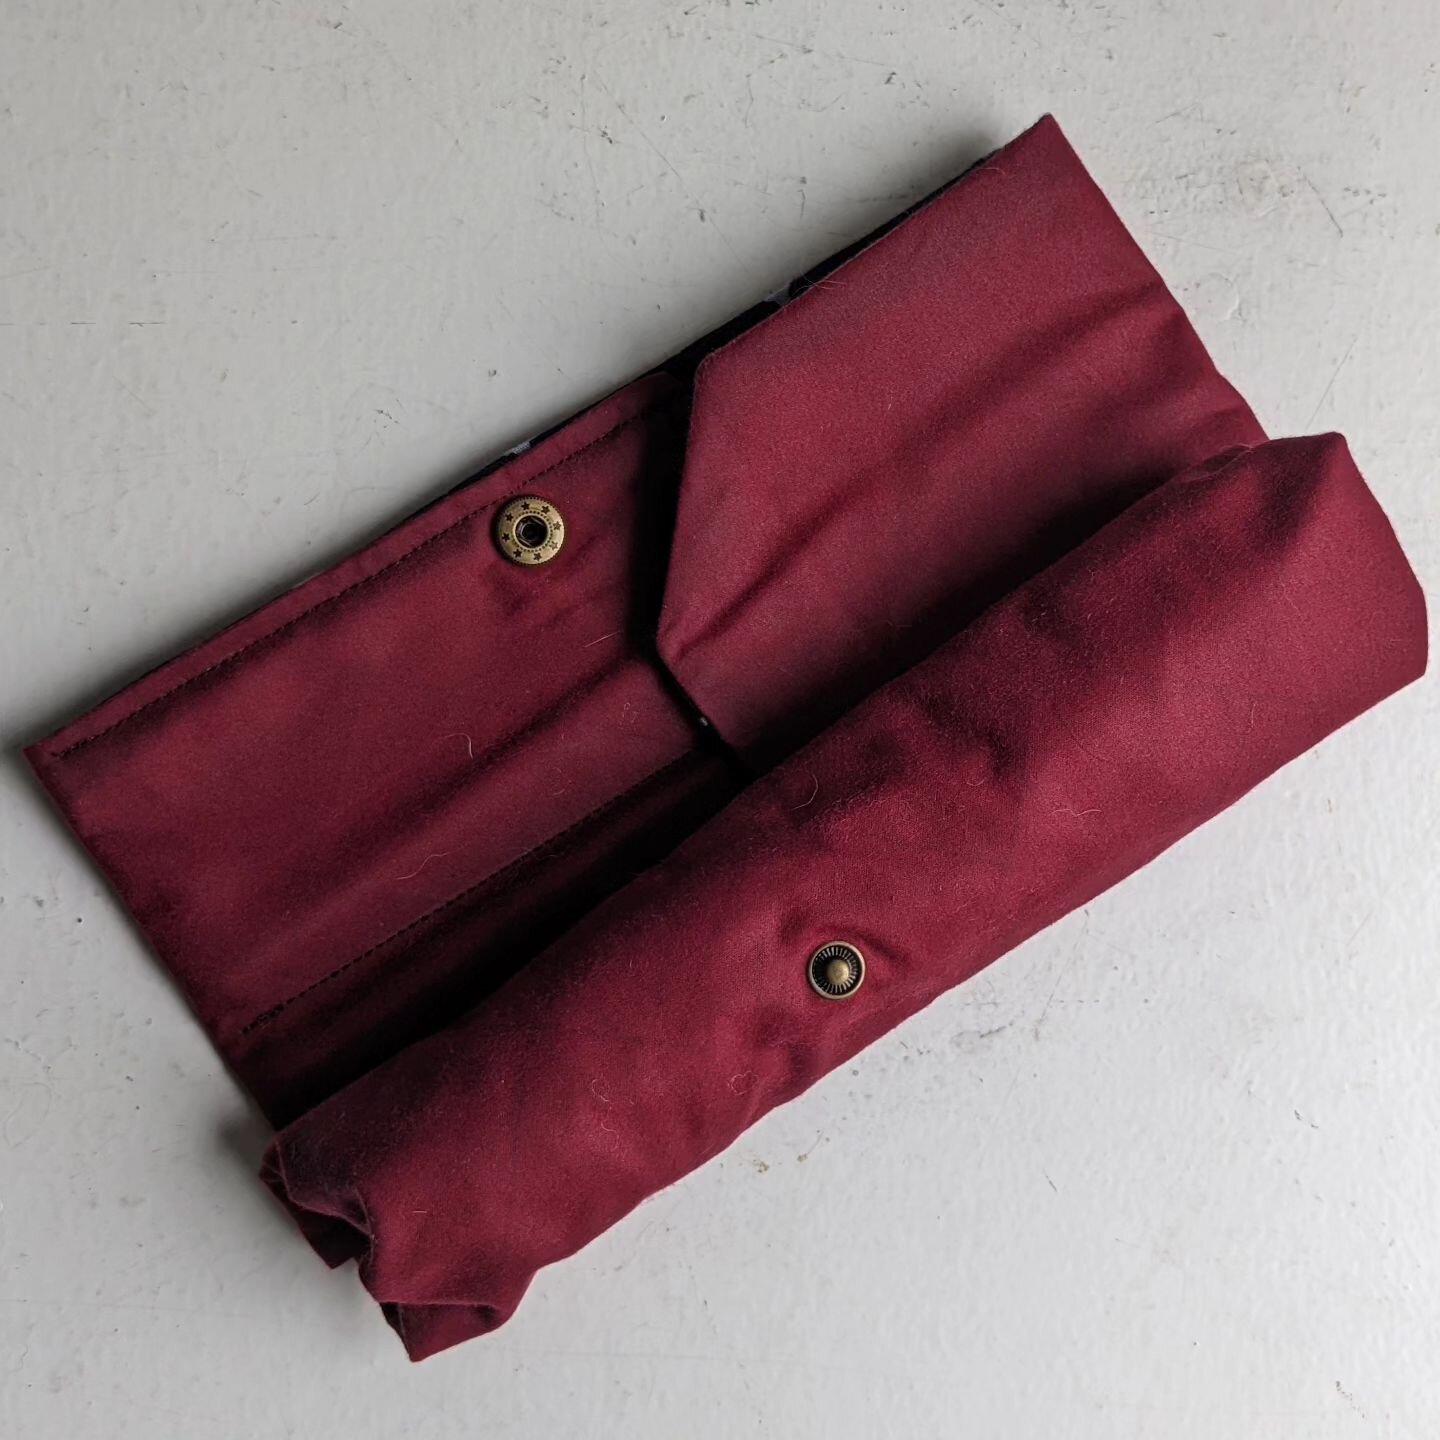 I made myself a cutlery roll, out of @arkdefo deadstock waxed cotton and vintage kimono fabric. I've taken a bunch of photos and will be writing it up on the blog in the next few weeks. I love the colour of this burgundy fabric though, it's perfect f